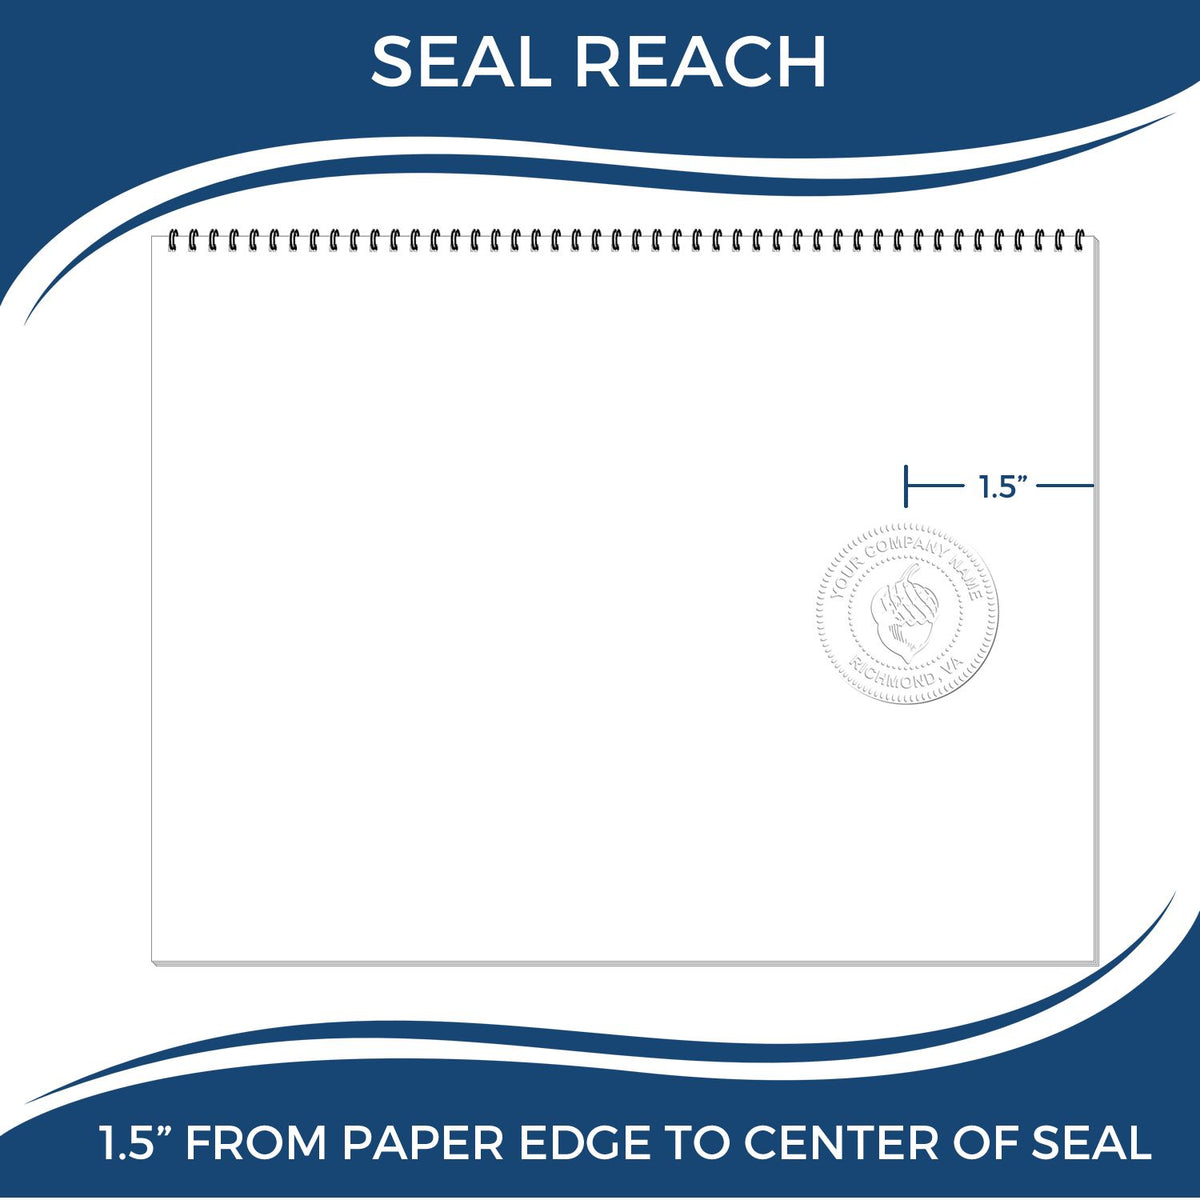 An infographic showing the seal reach which is represented by a ruler and a miniature seal image of the Gift New Hampshire Landscape Architect Seal